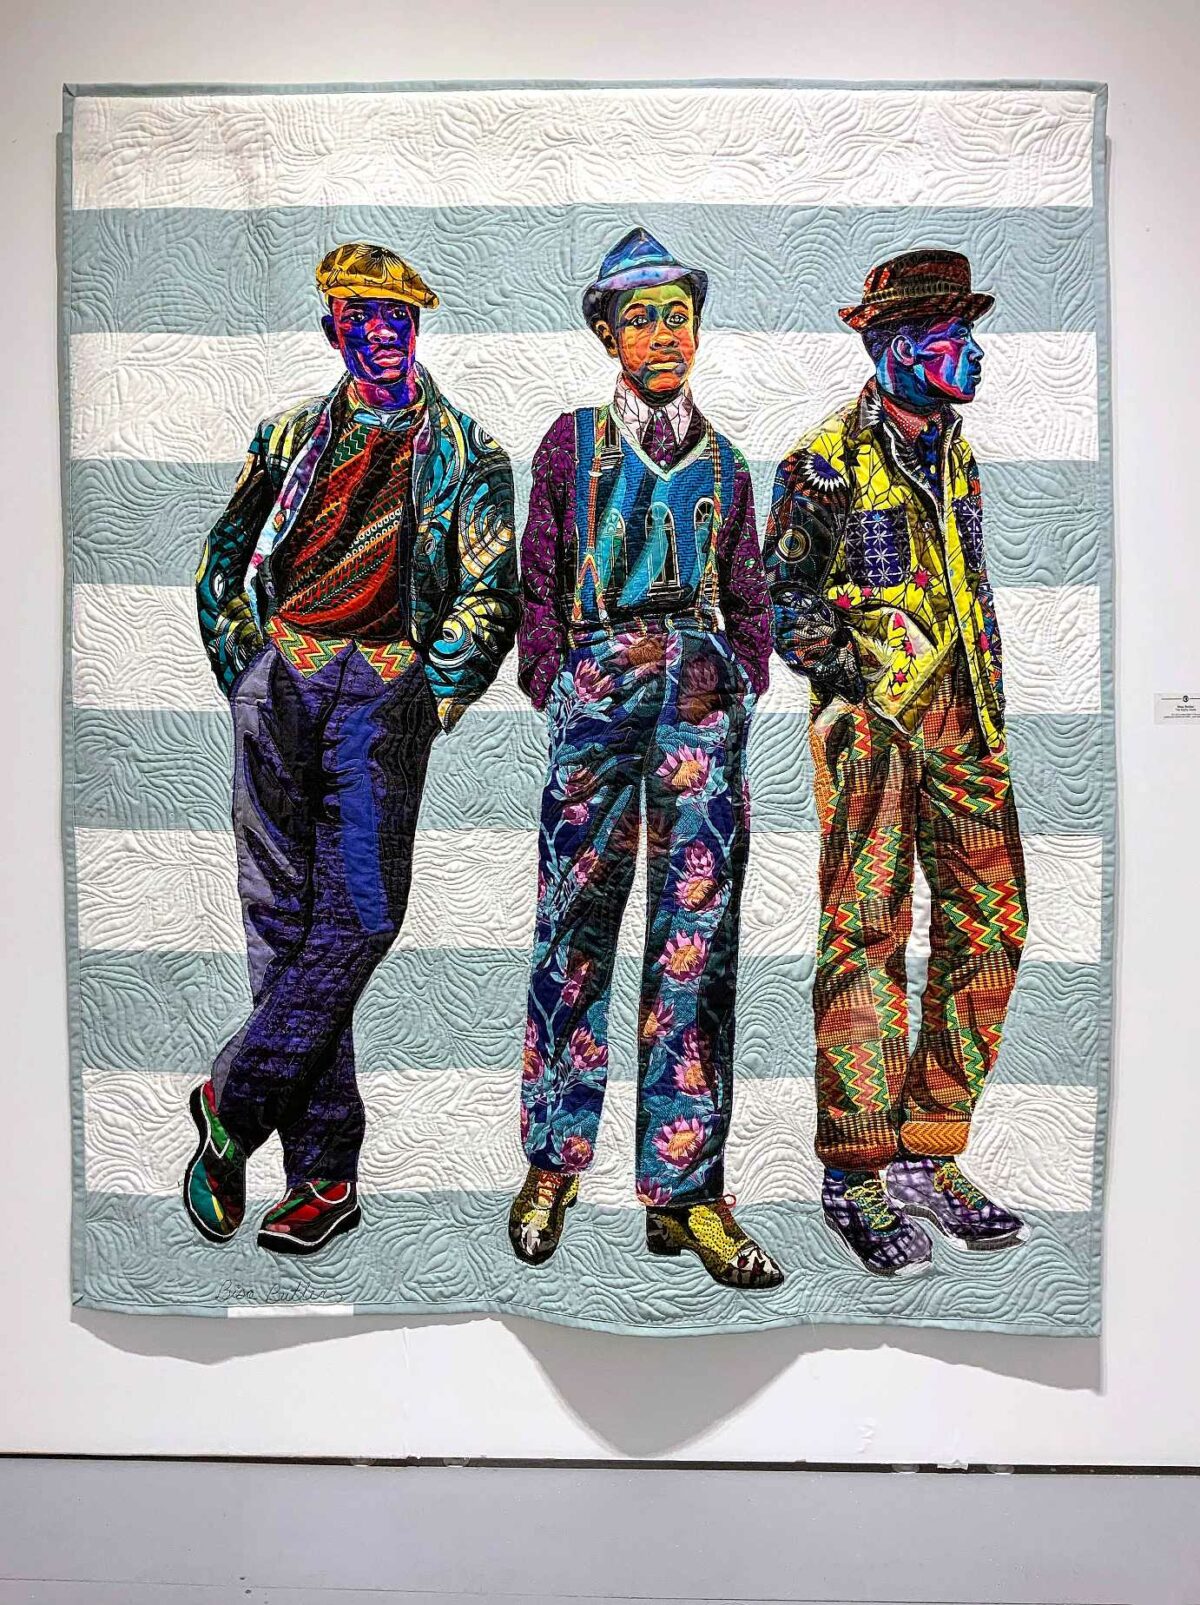 Vibrant Portraits Painted With Patterned Fabrics By Bisa Butler 7